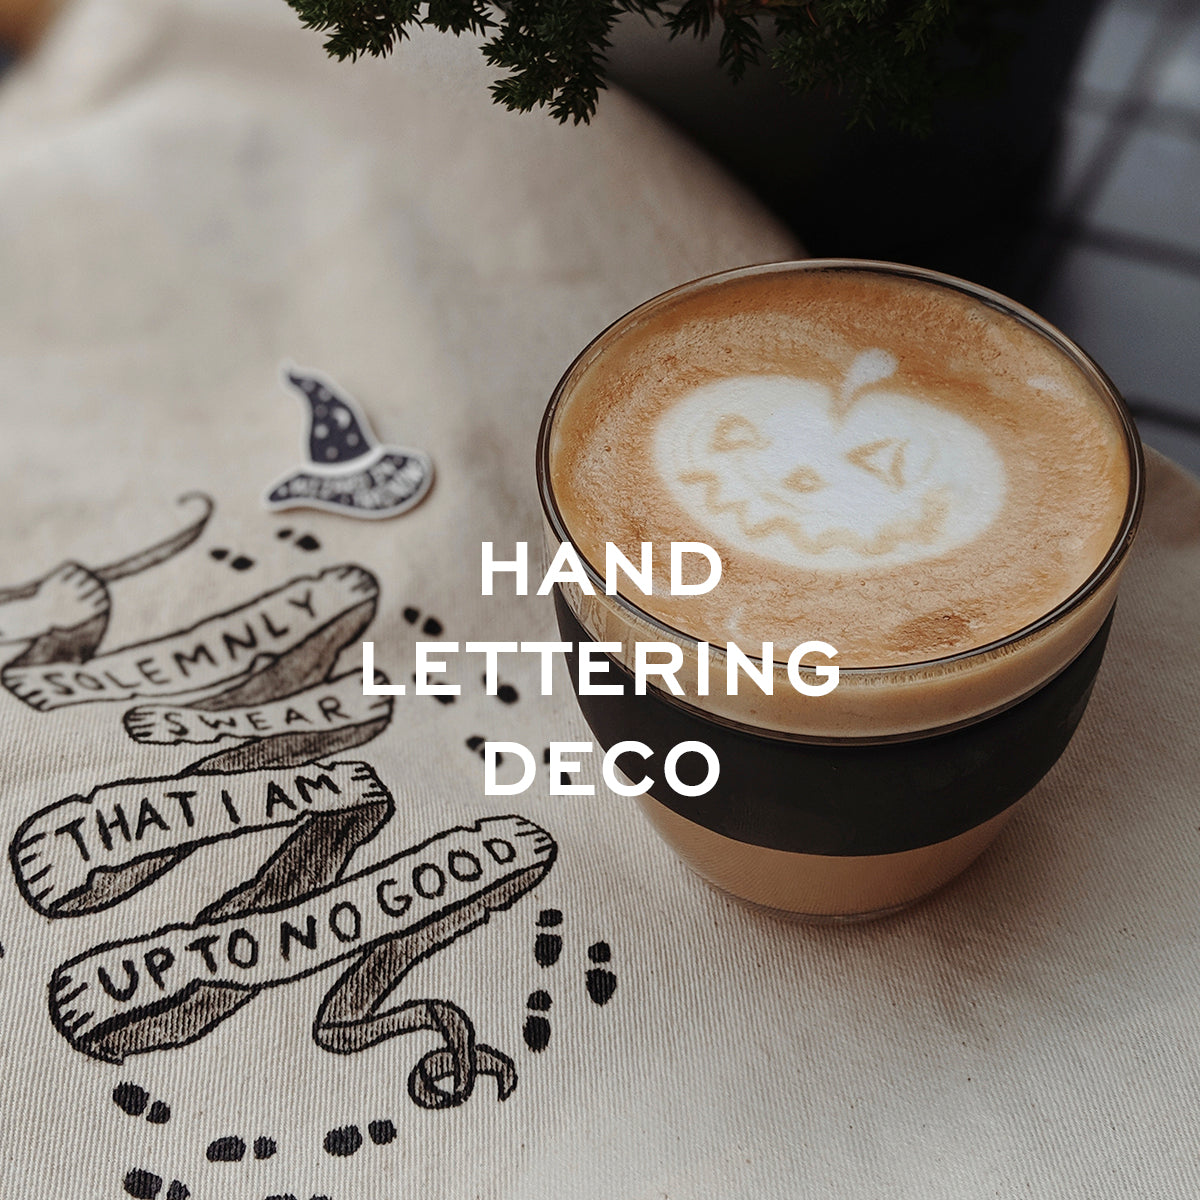 Hand Lettering Deco